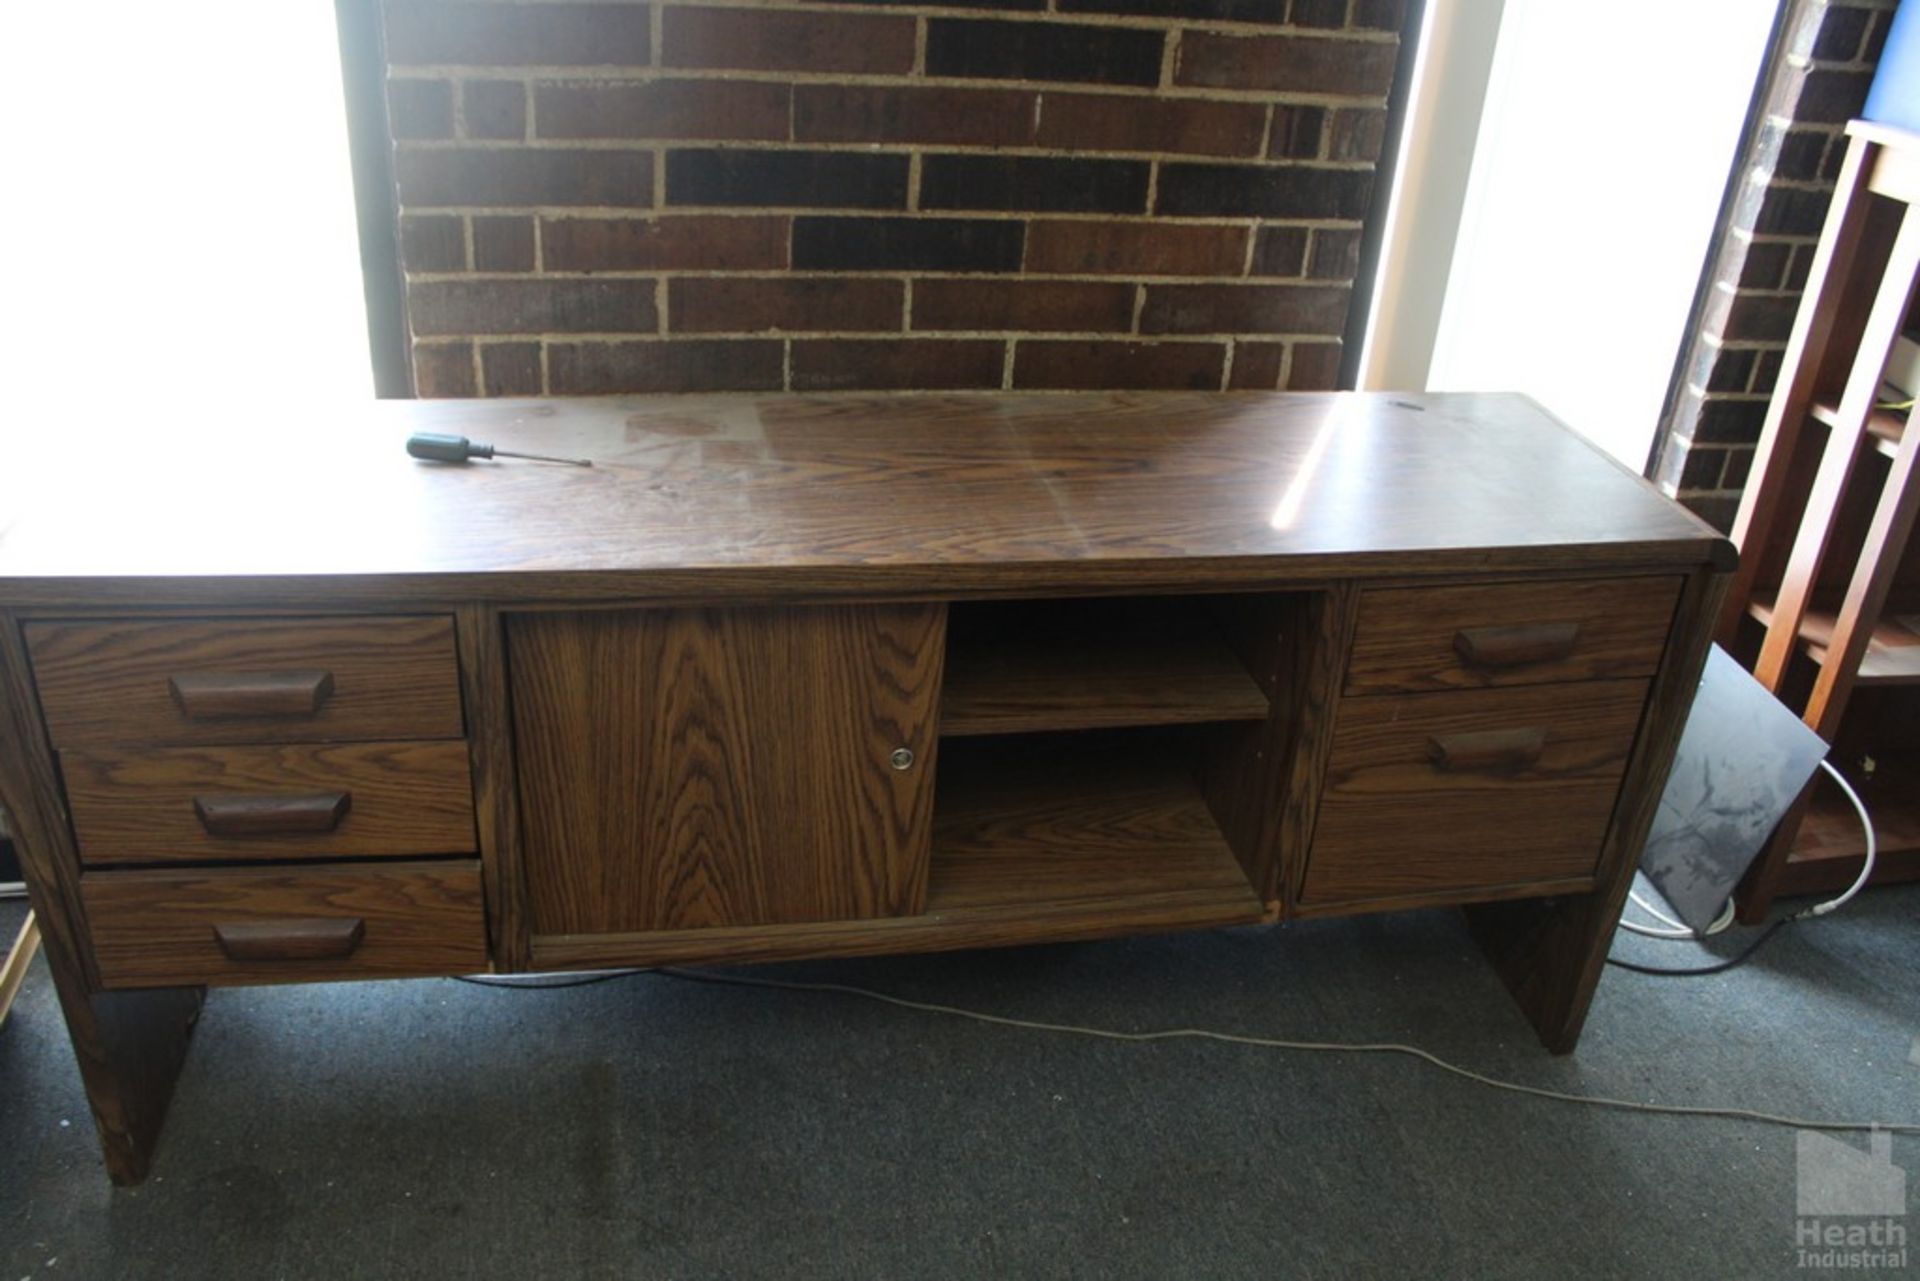 OFFICE DESK, FILE CABINET, CREDENZA AND CHAIR - Image 2 of 2